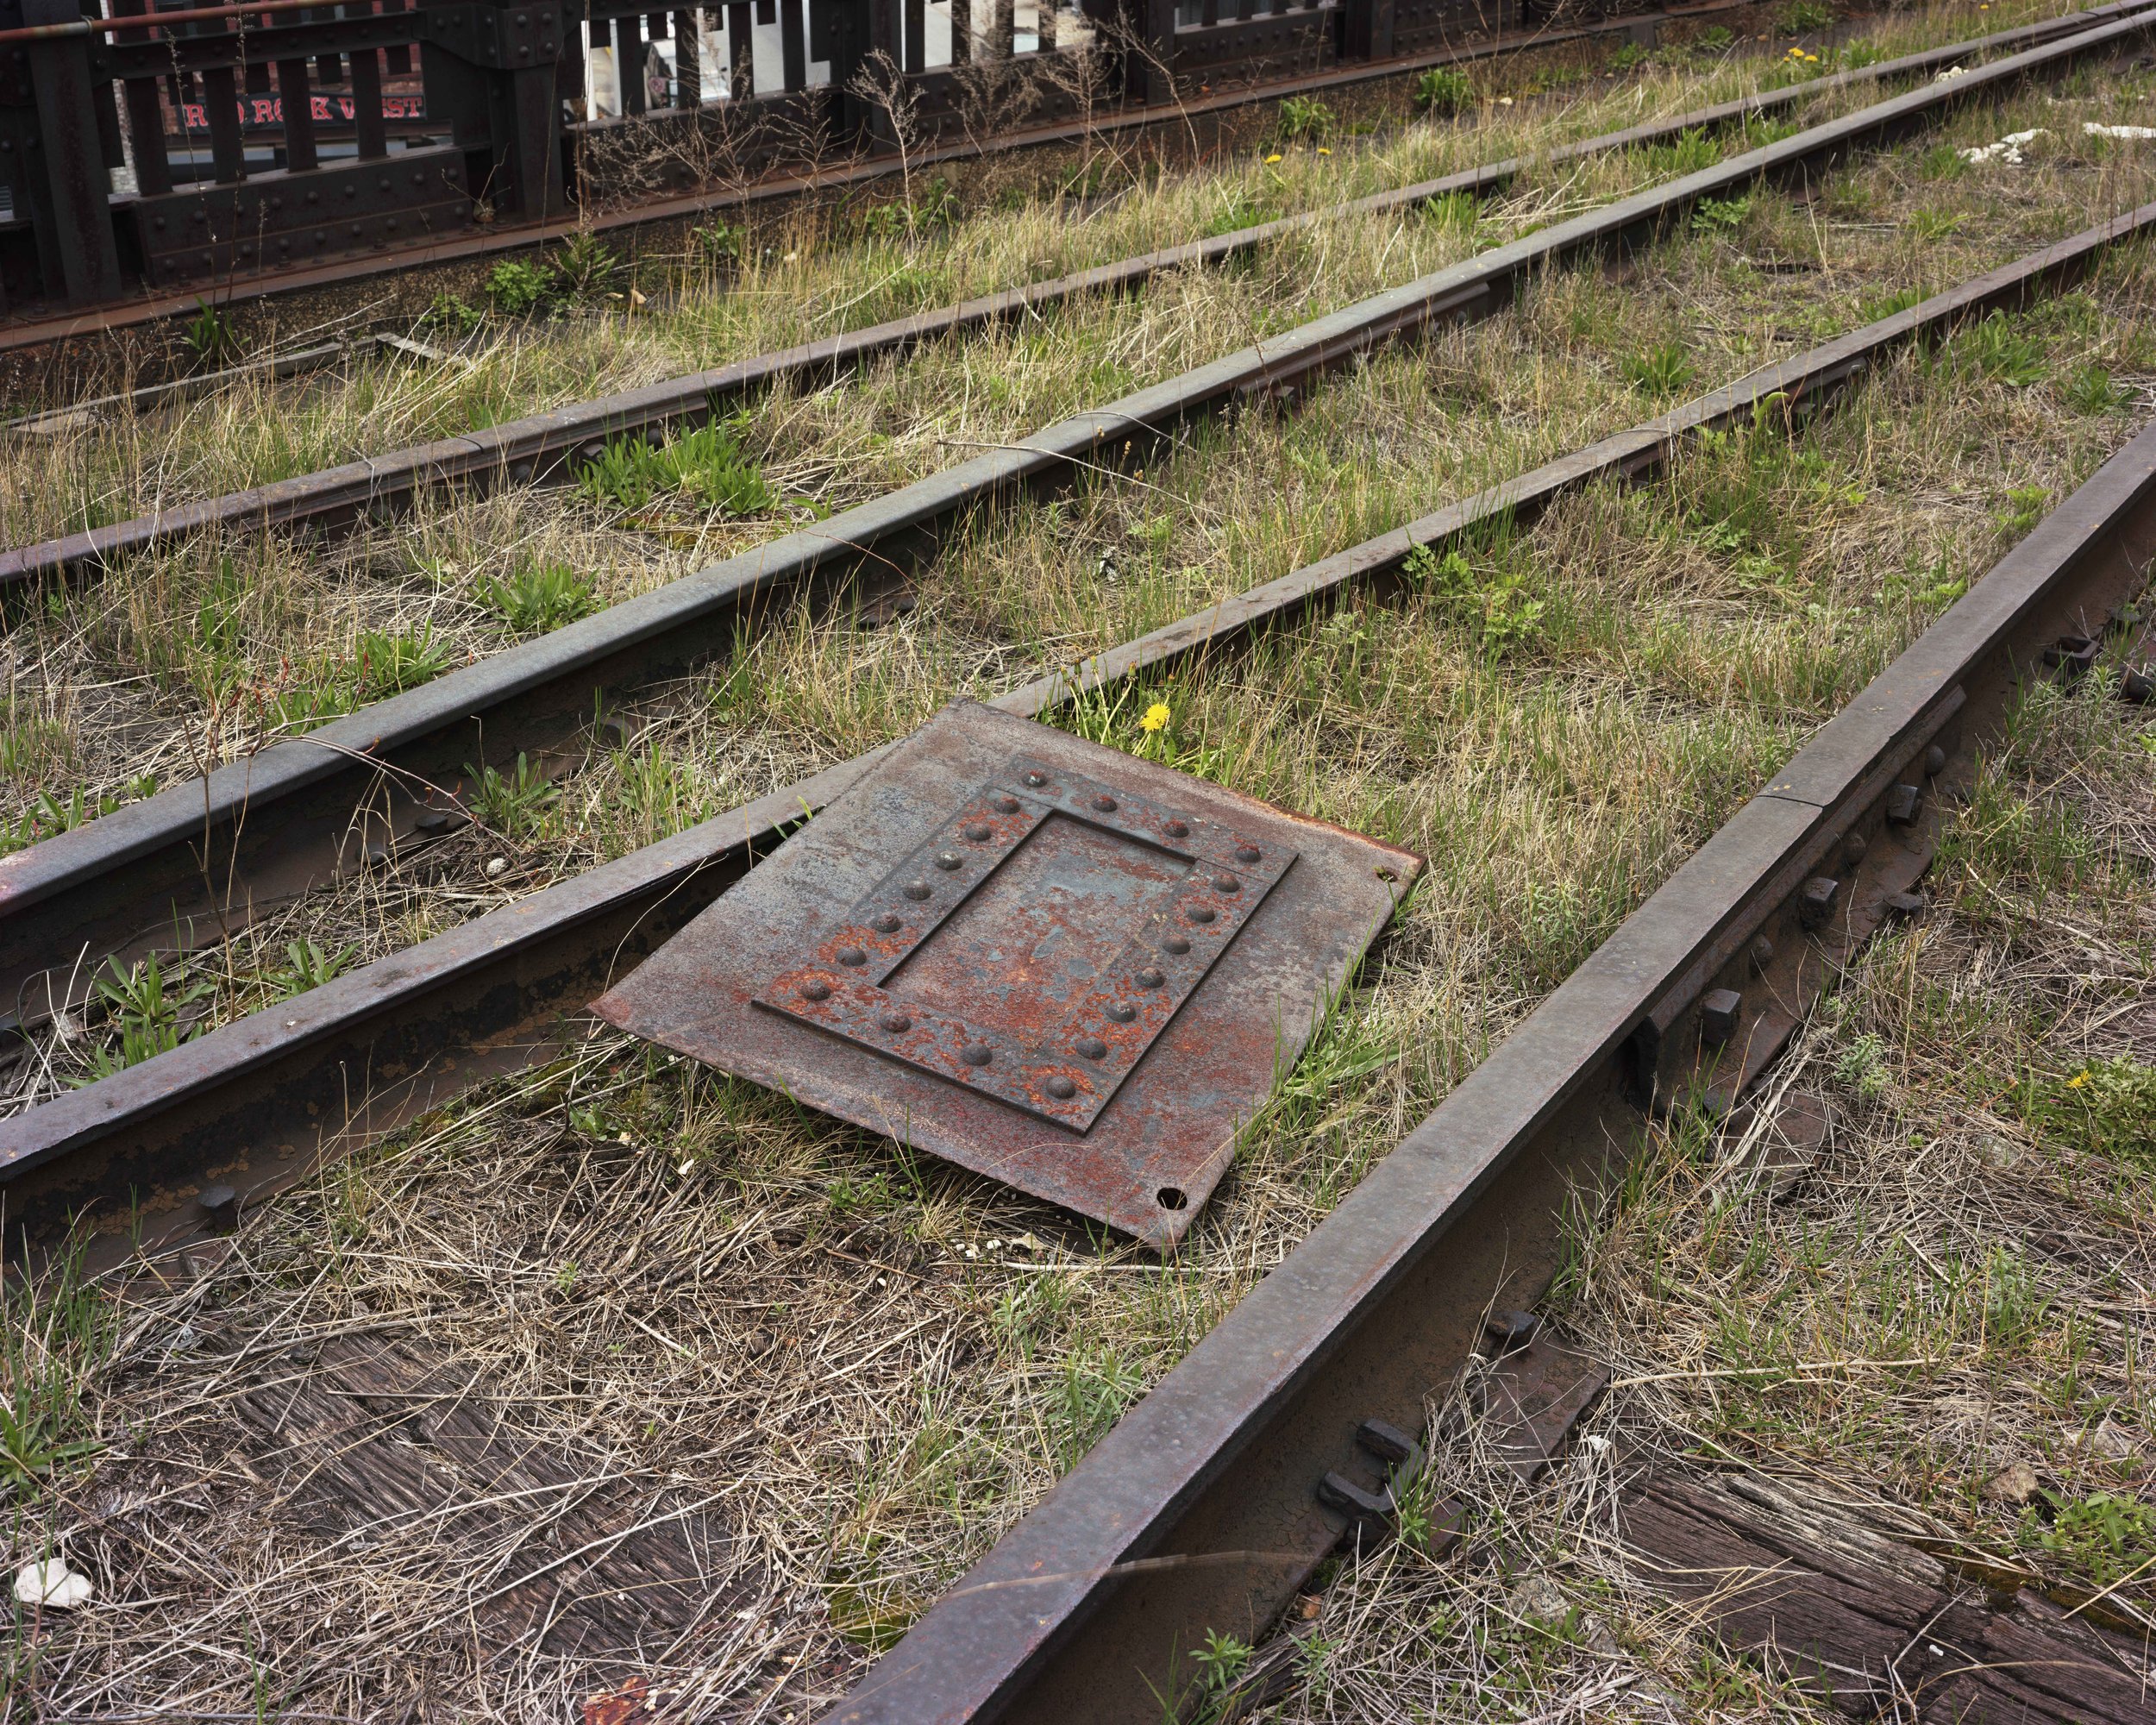 An Iron Plate, Part of the Original (1930s) Construction of the High Line